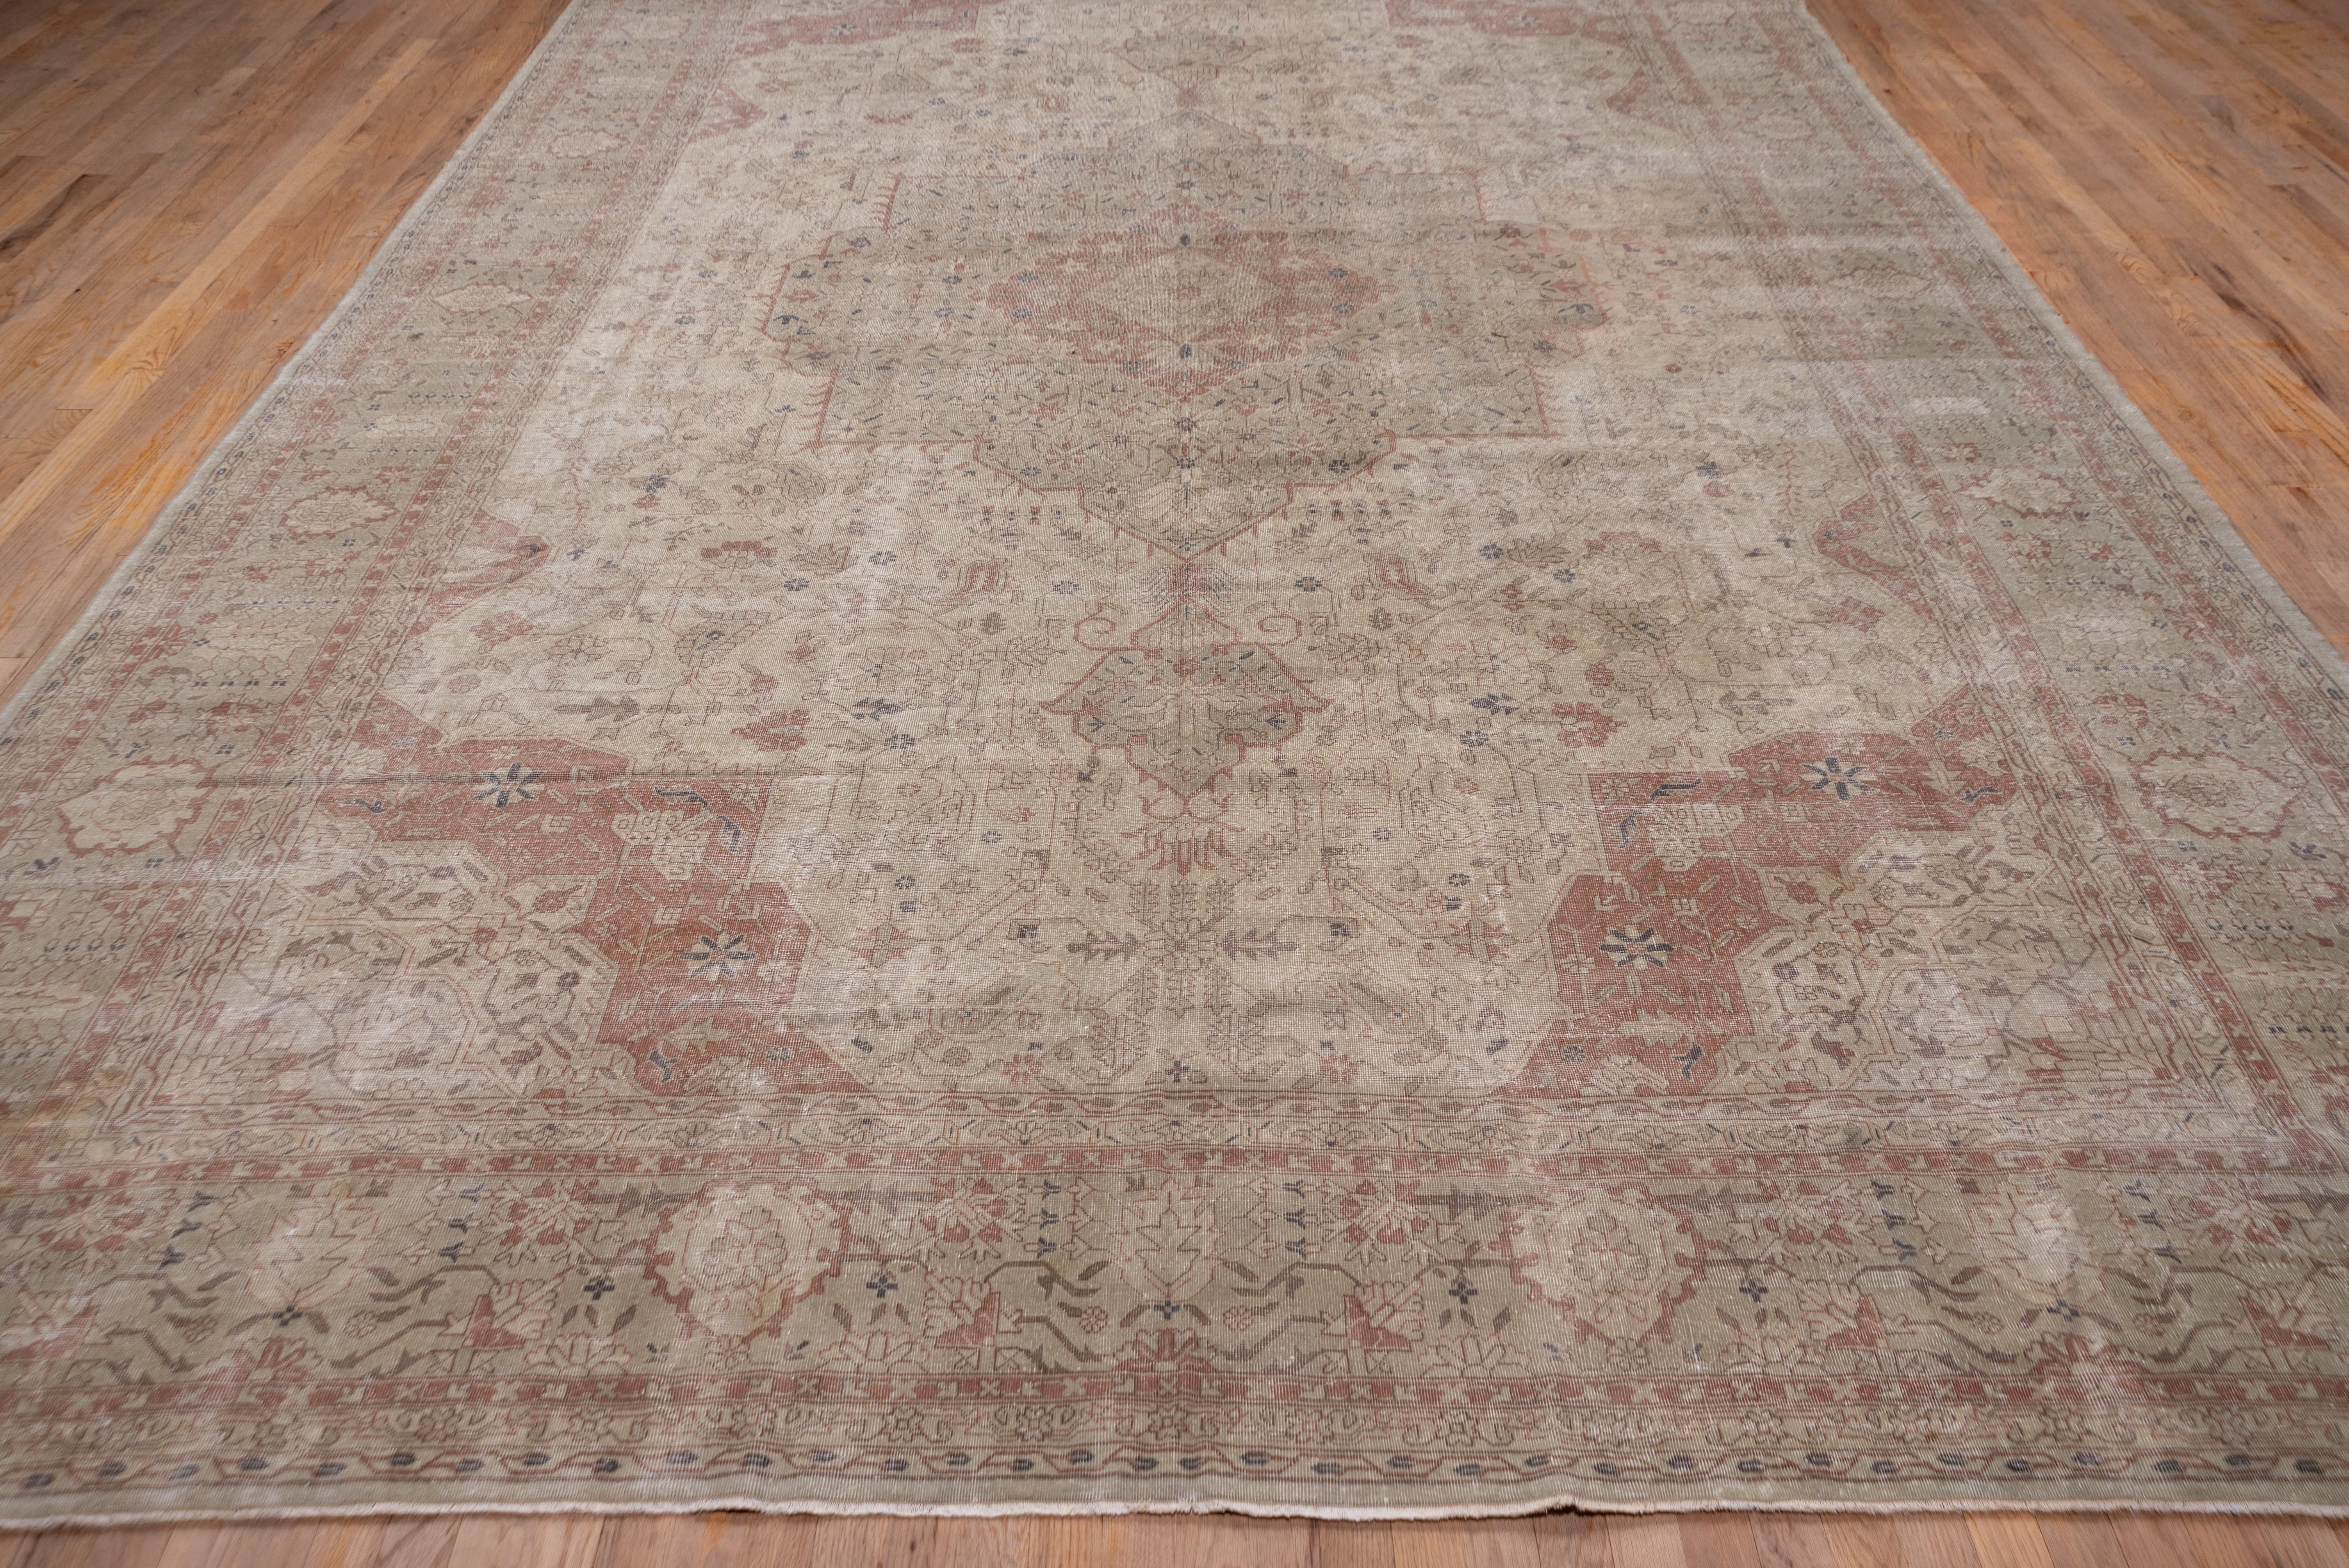 In the Persian Heriz style with a large octogramme medallion and matching quarter corners with angular vines and flowers, all on a cream ground. The khaki border shows a classic in-and-out palmette pattern.